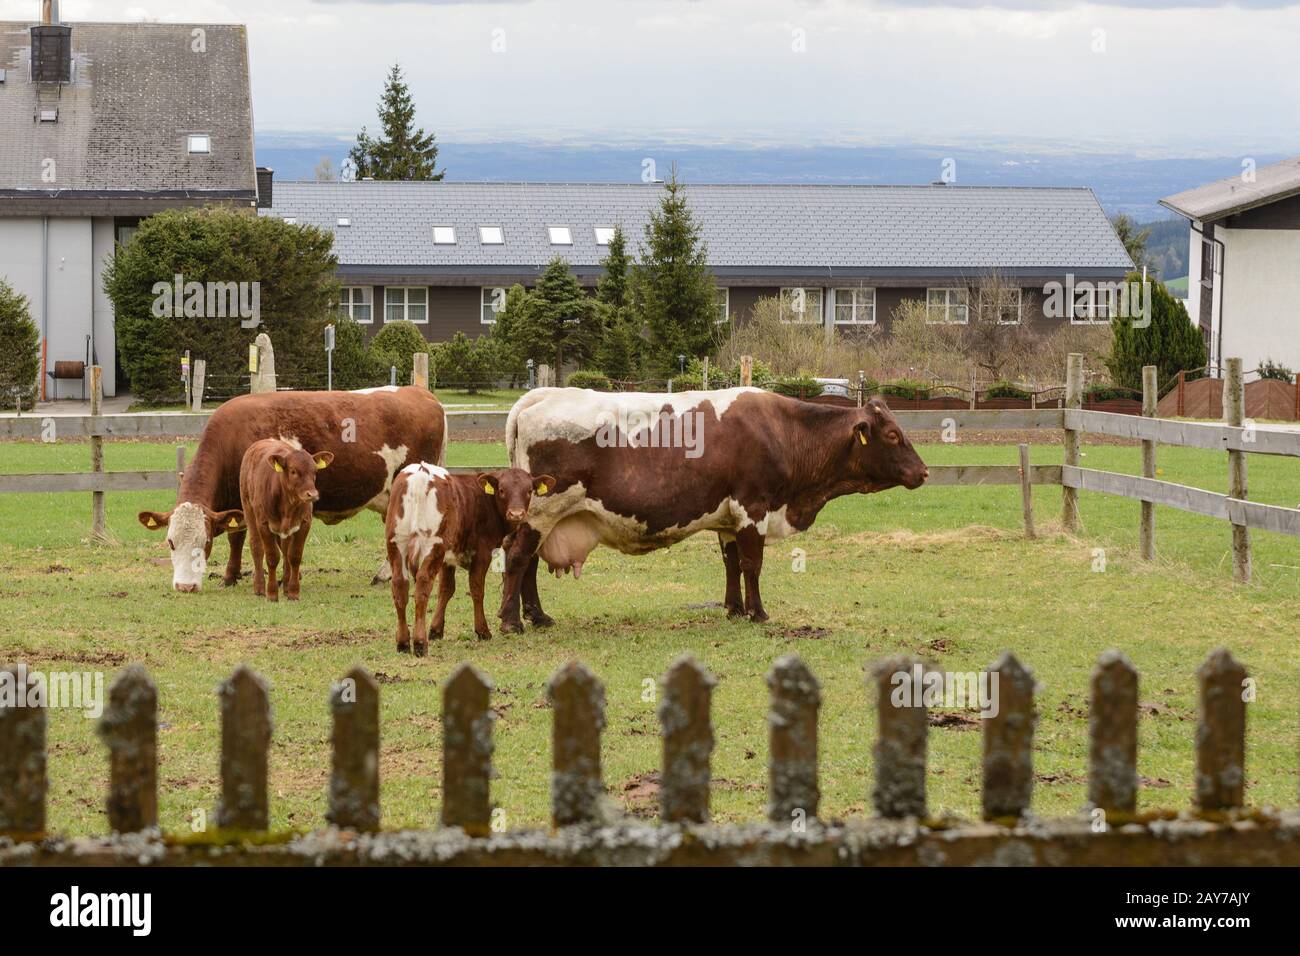 Cattle on fenced pastures - Dairy cows and calves Stock Photo